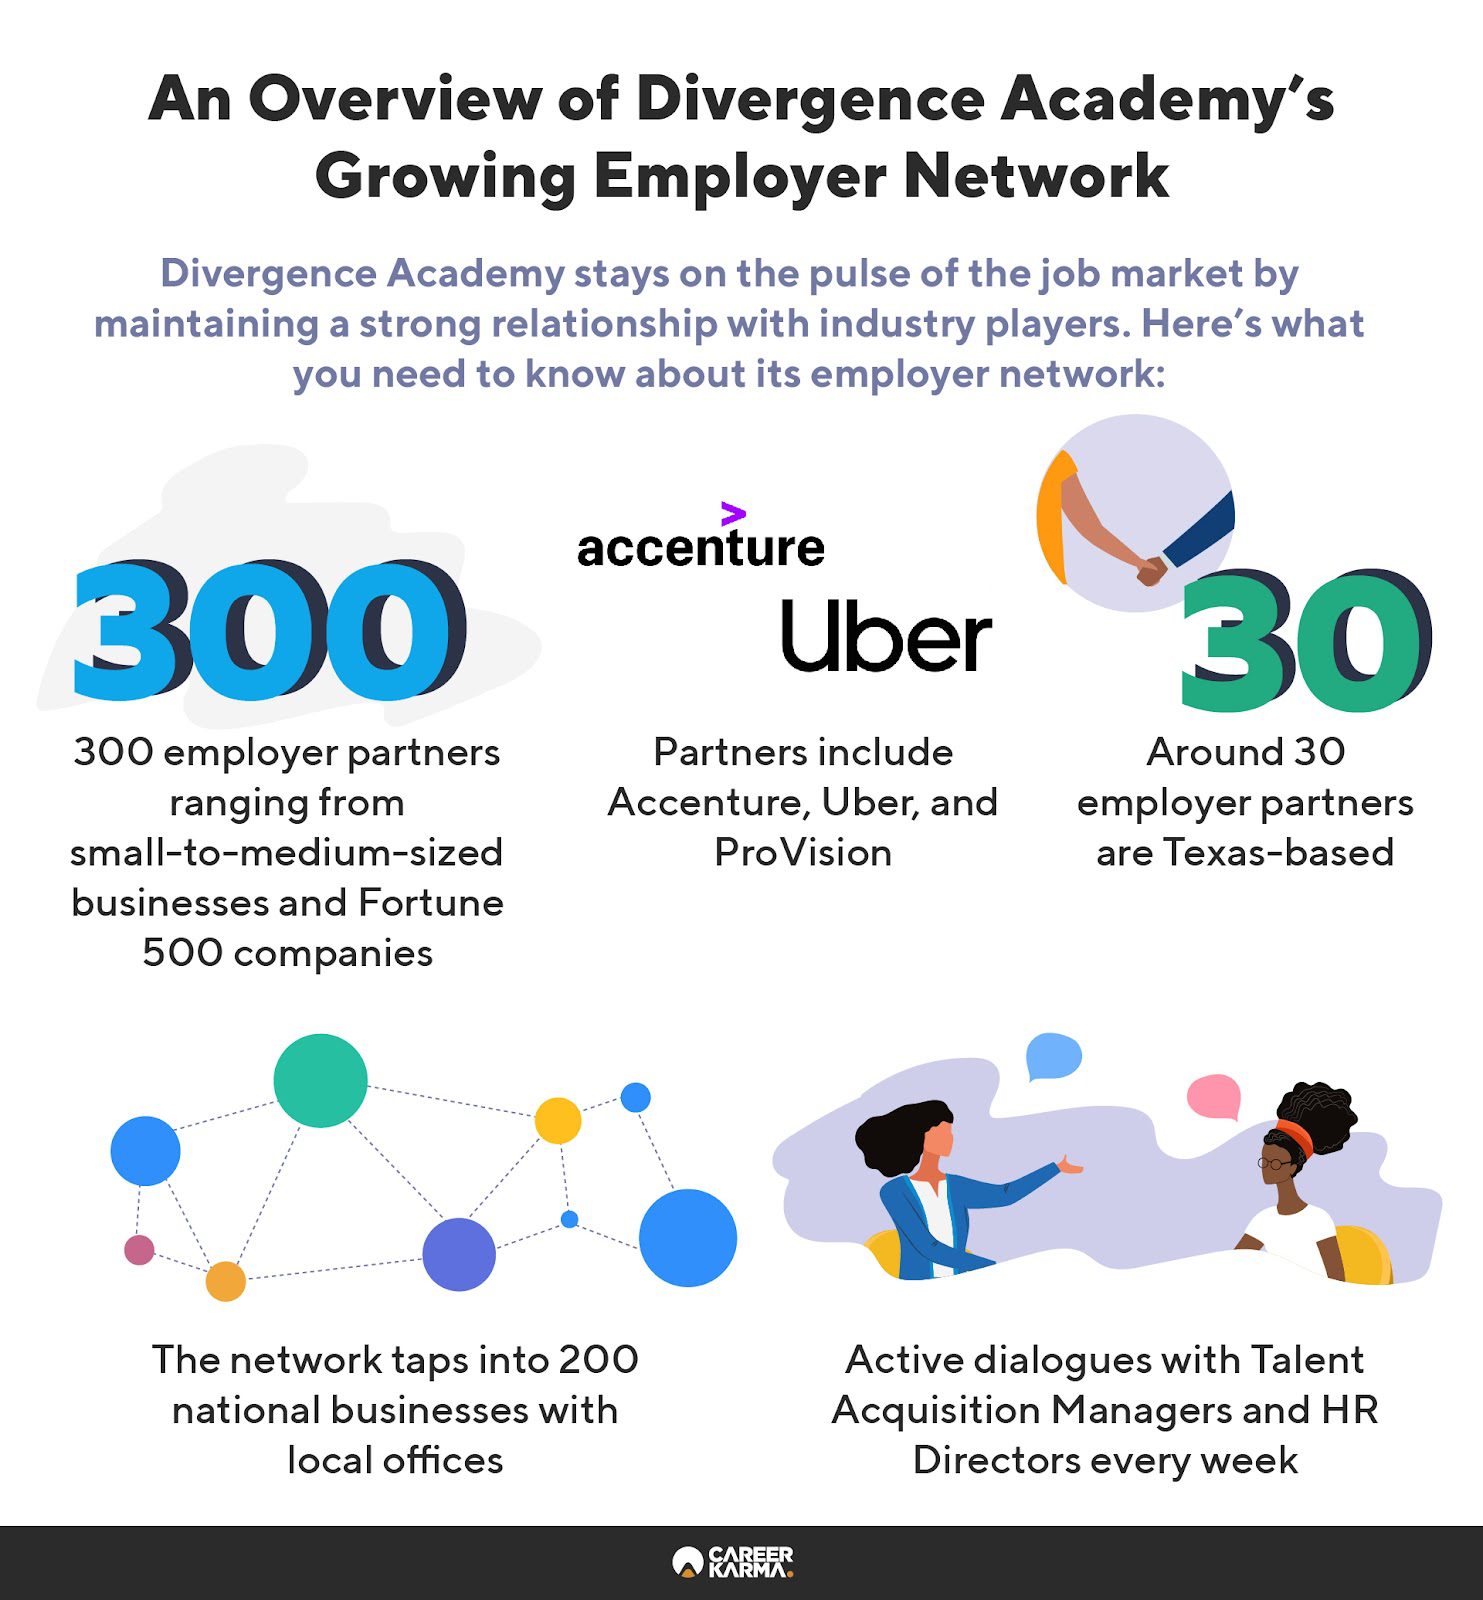 An infographic outlining Divergence Academy’s employer network